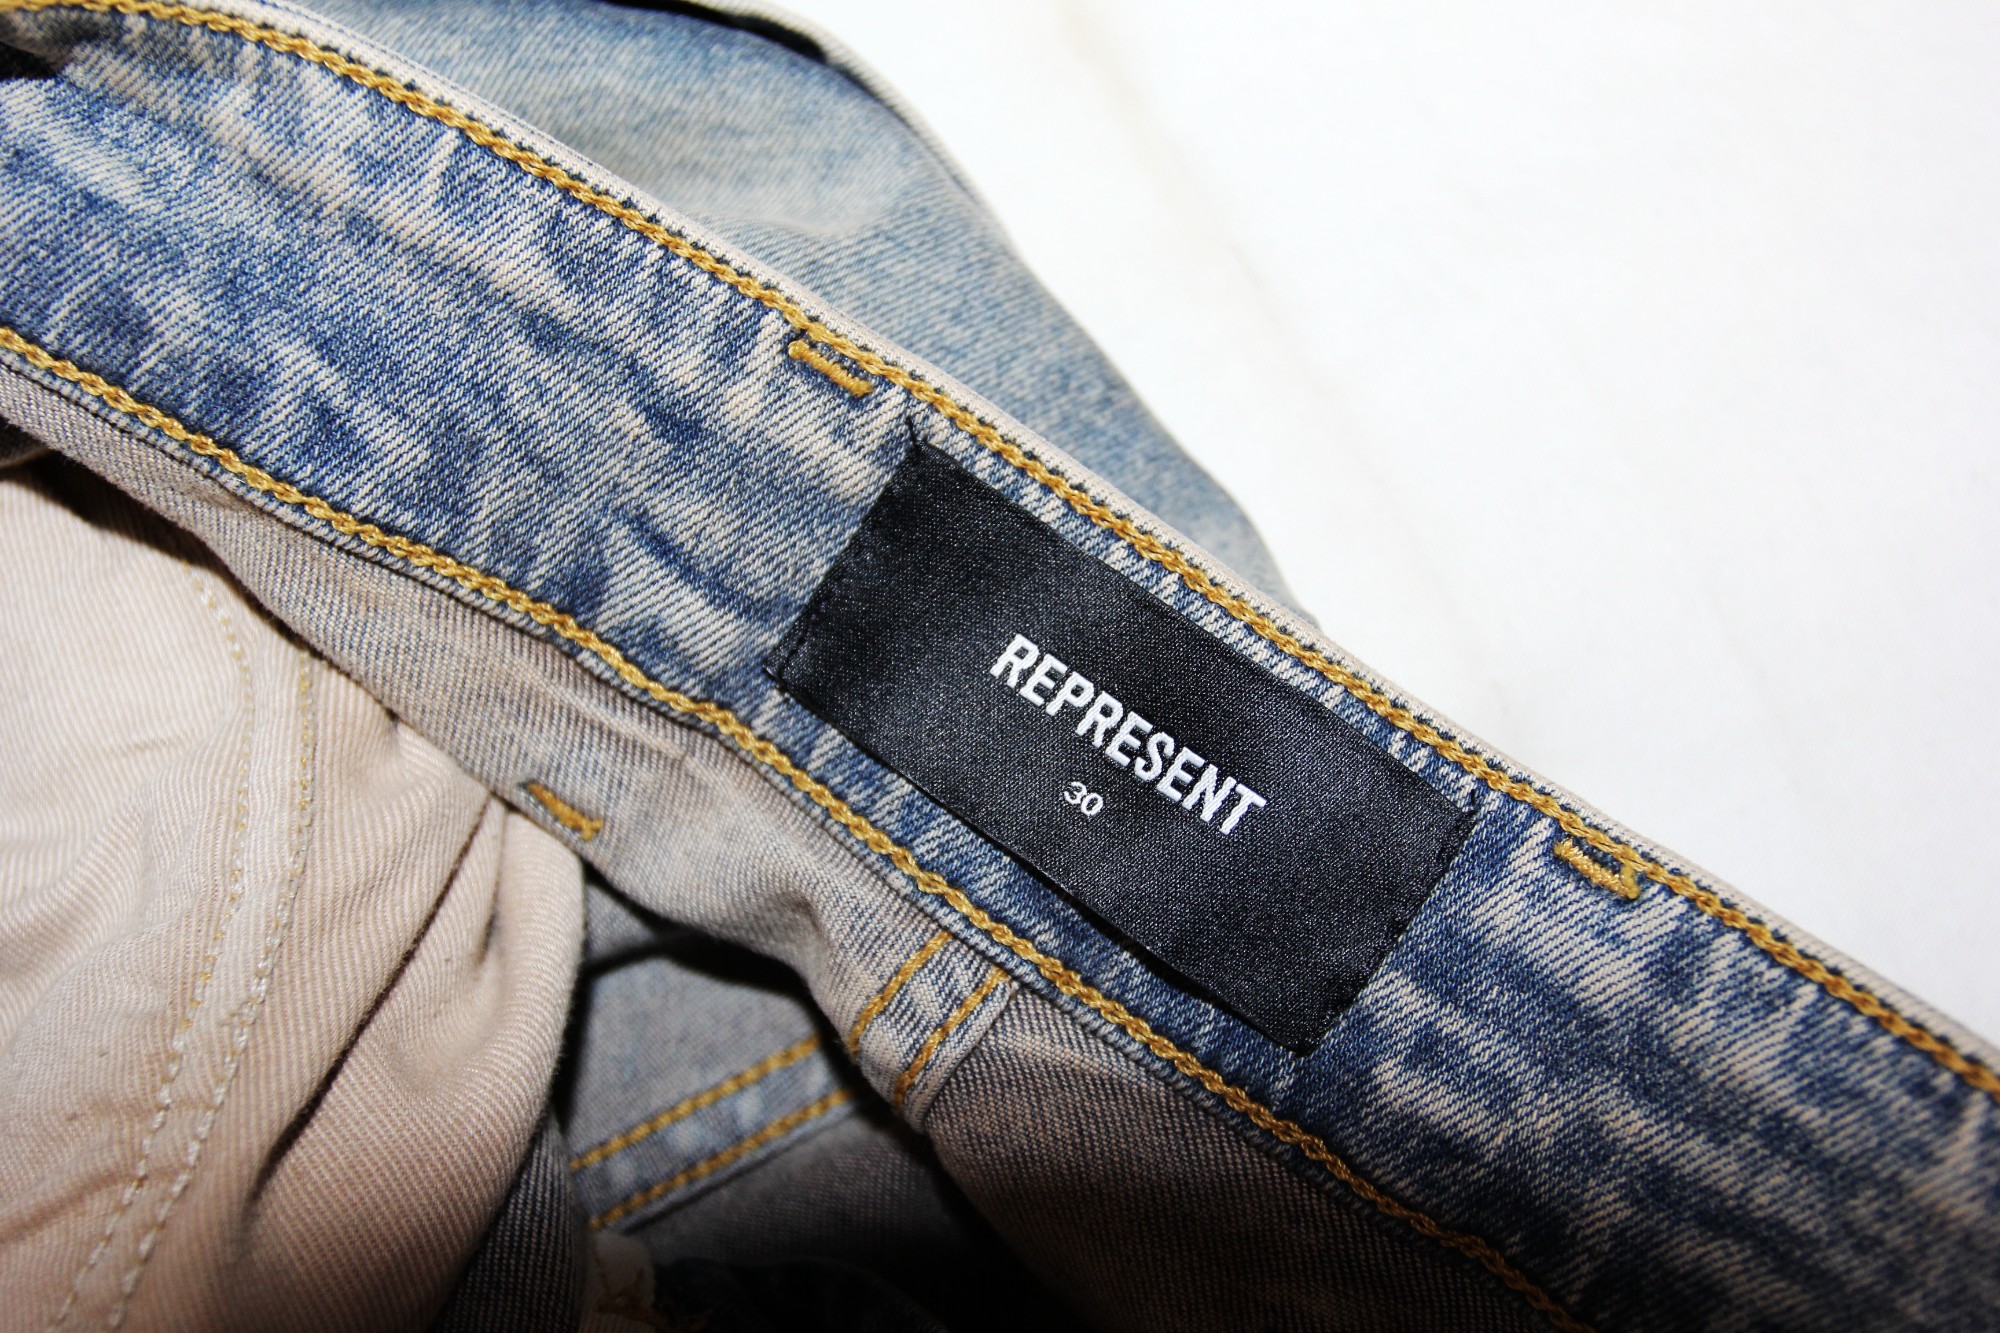 BNWT SS23 REPRESENT STORMS IN HEAVEAN JEANS 30 - 7